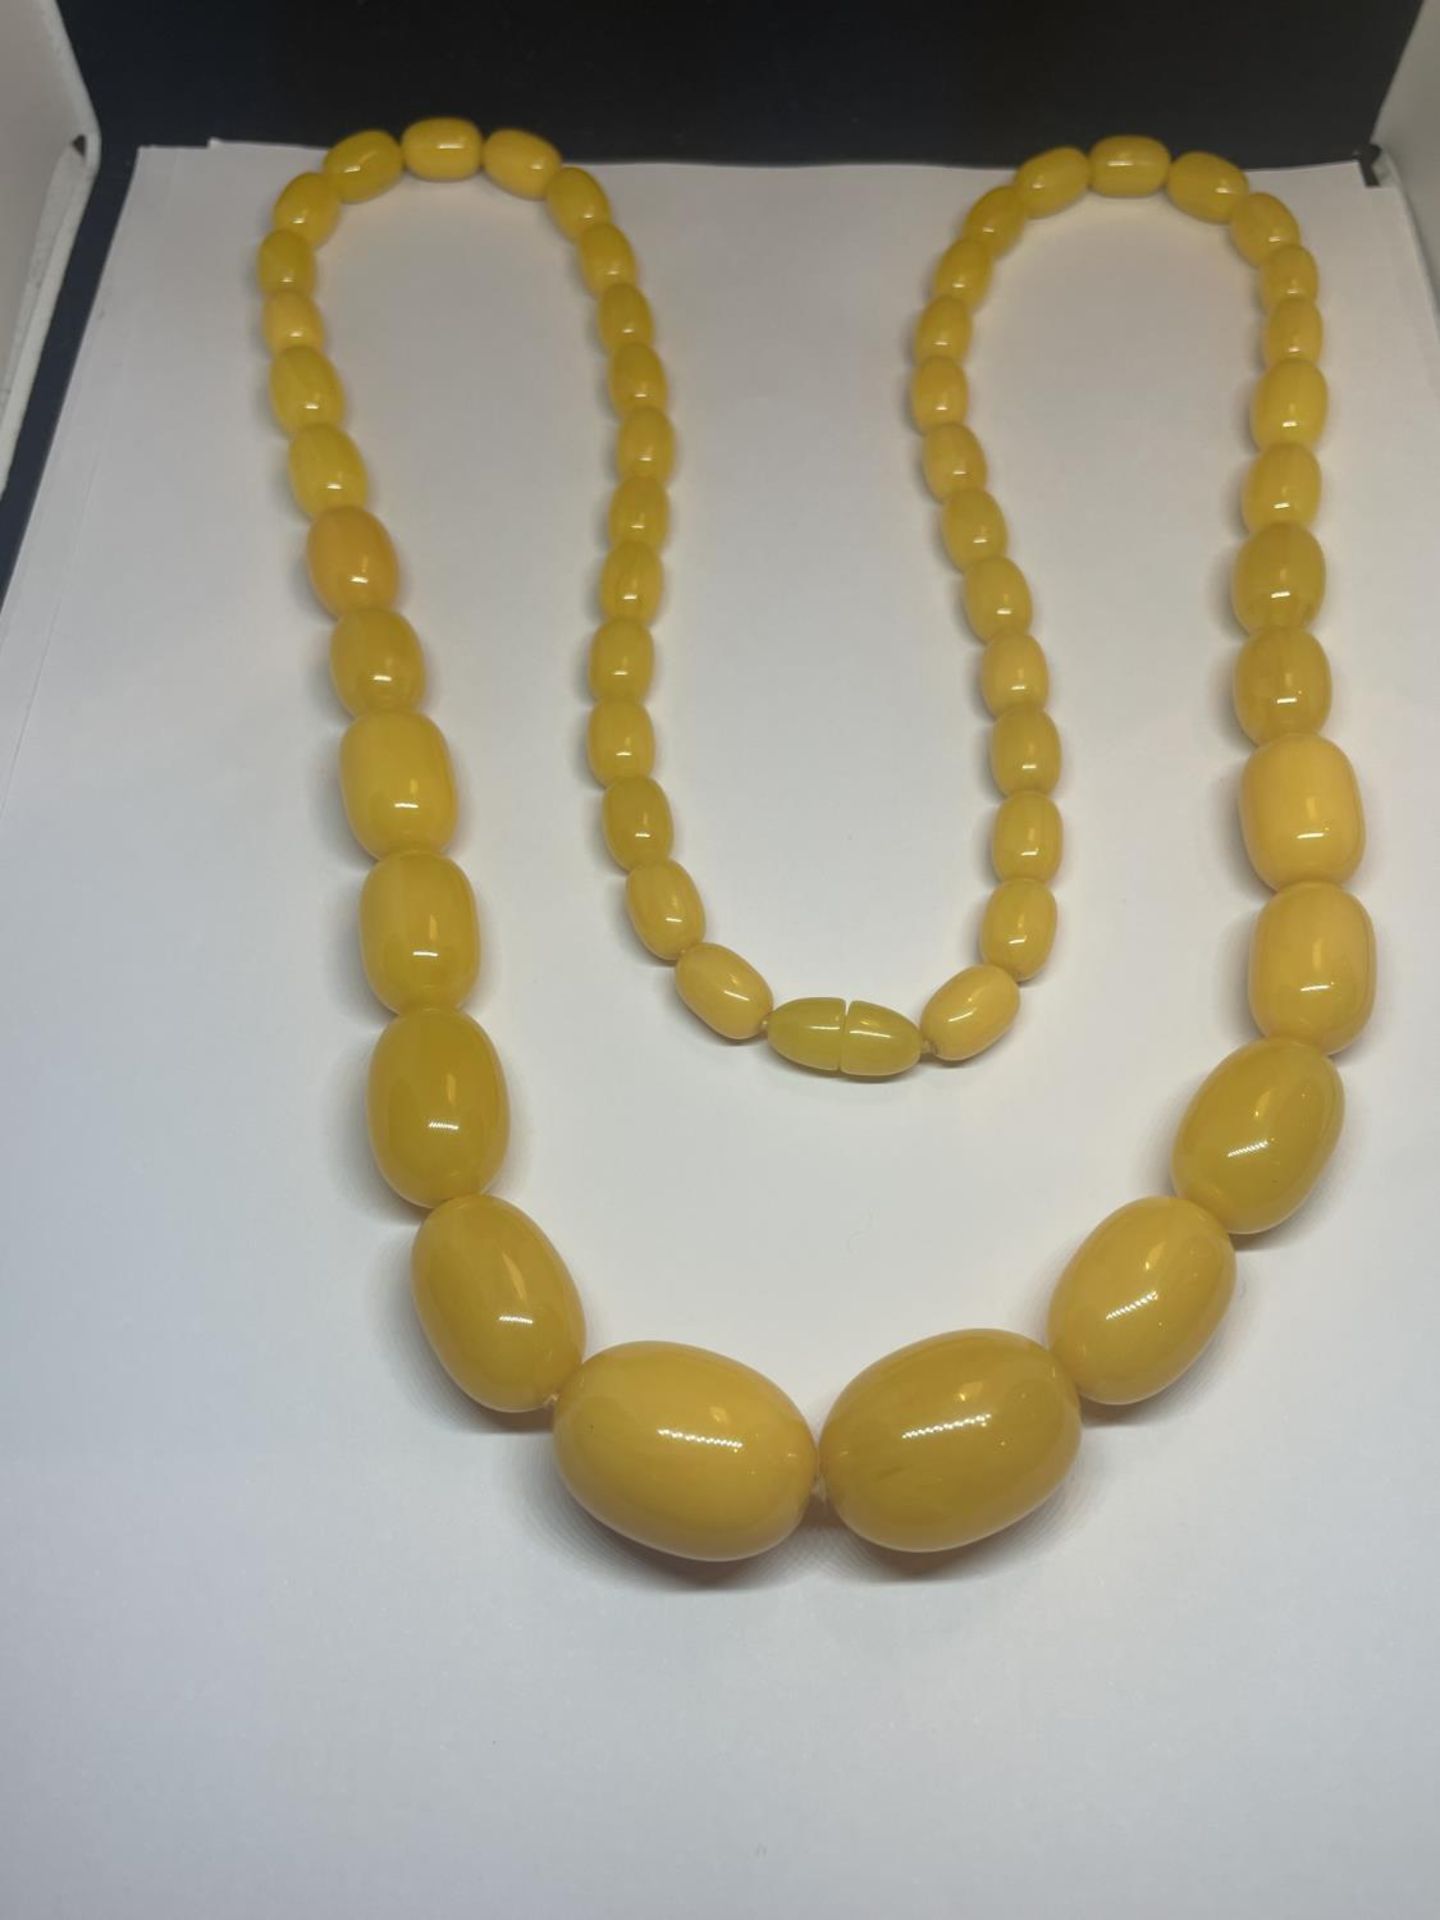 A BUTTERSCOTCH AMBER NECKLACE WITH DISCREET SCREW CLASP LENGTH 95CM - Image 2 of 5